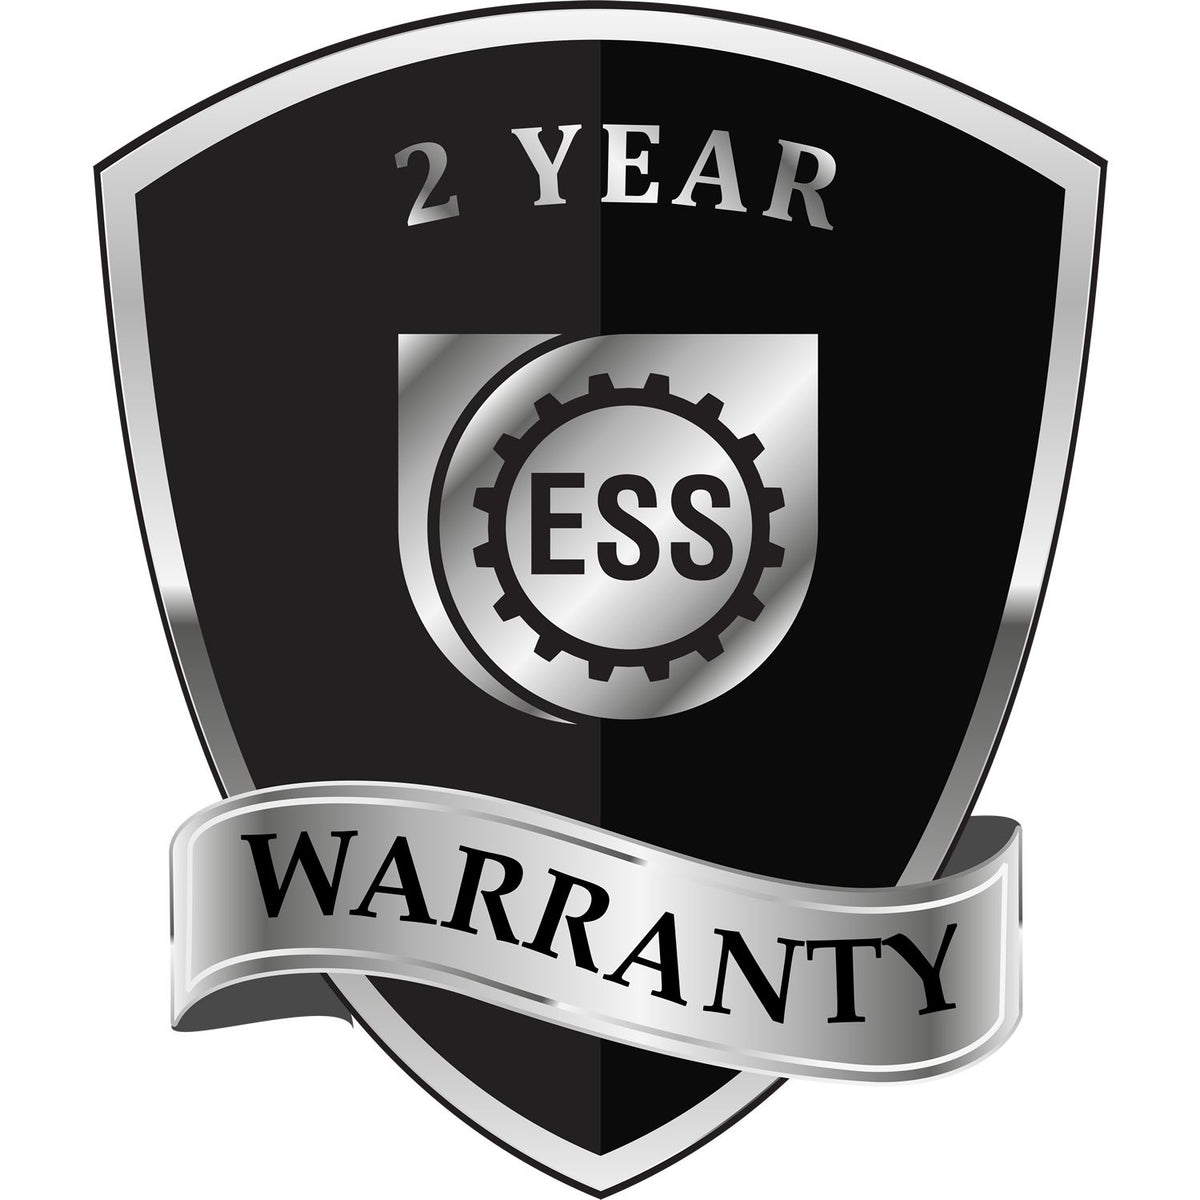 A badge or emblem showing a warranty icon for the Extended Long Reach Rhode Island Architect Seal Embosser